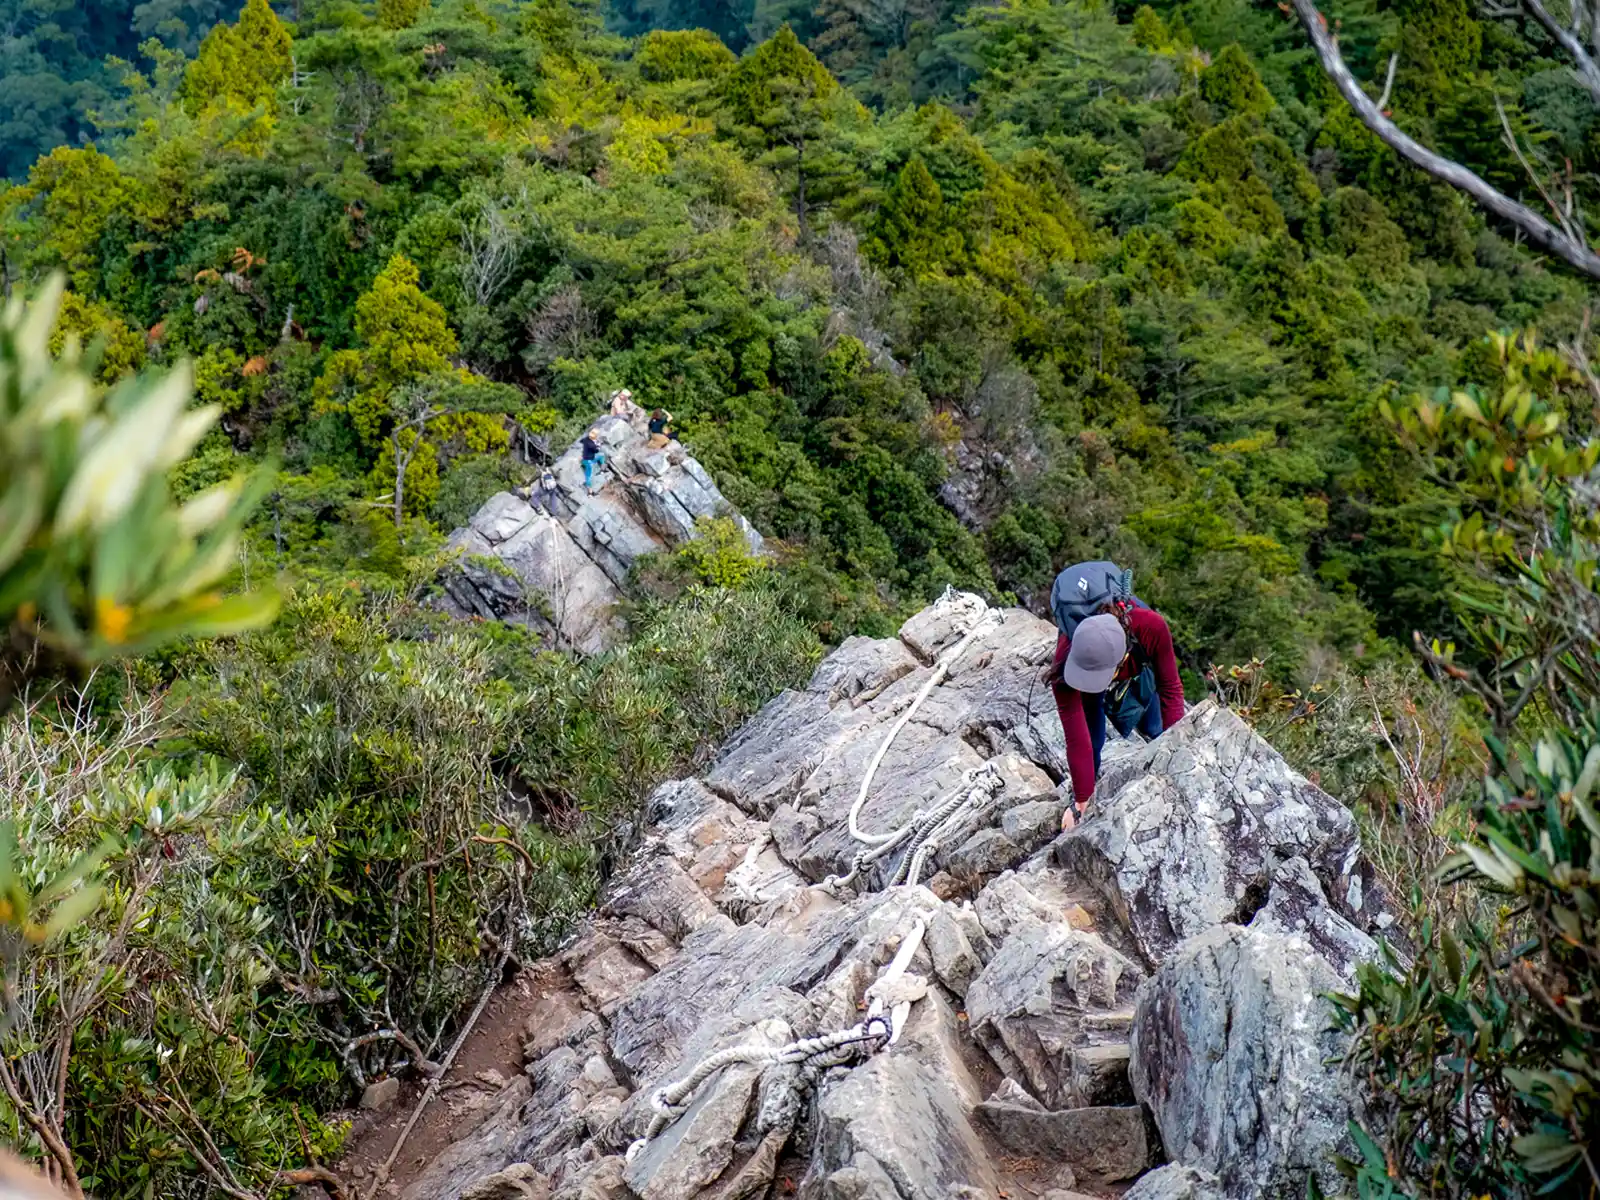 A steep and exposed climb is protected with ropes.